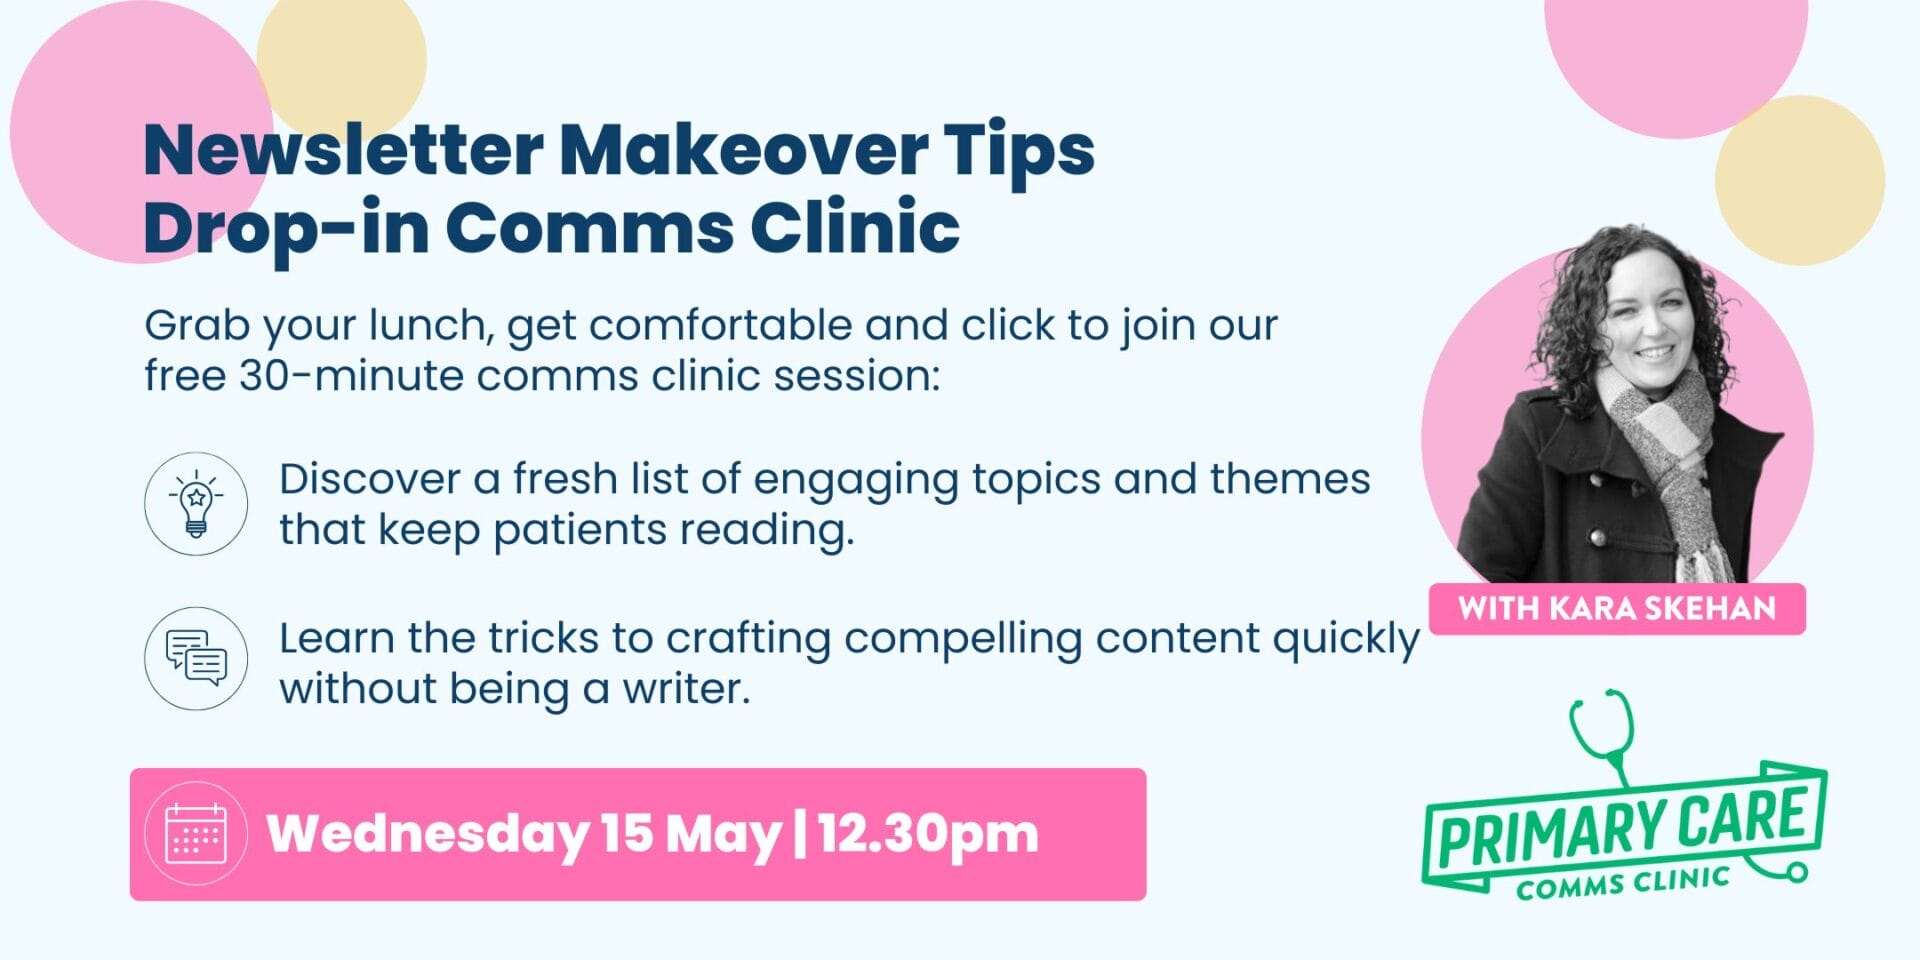 Drop-in Comms Clinic: Newsletter Makeover Tips